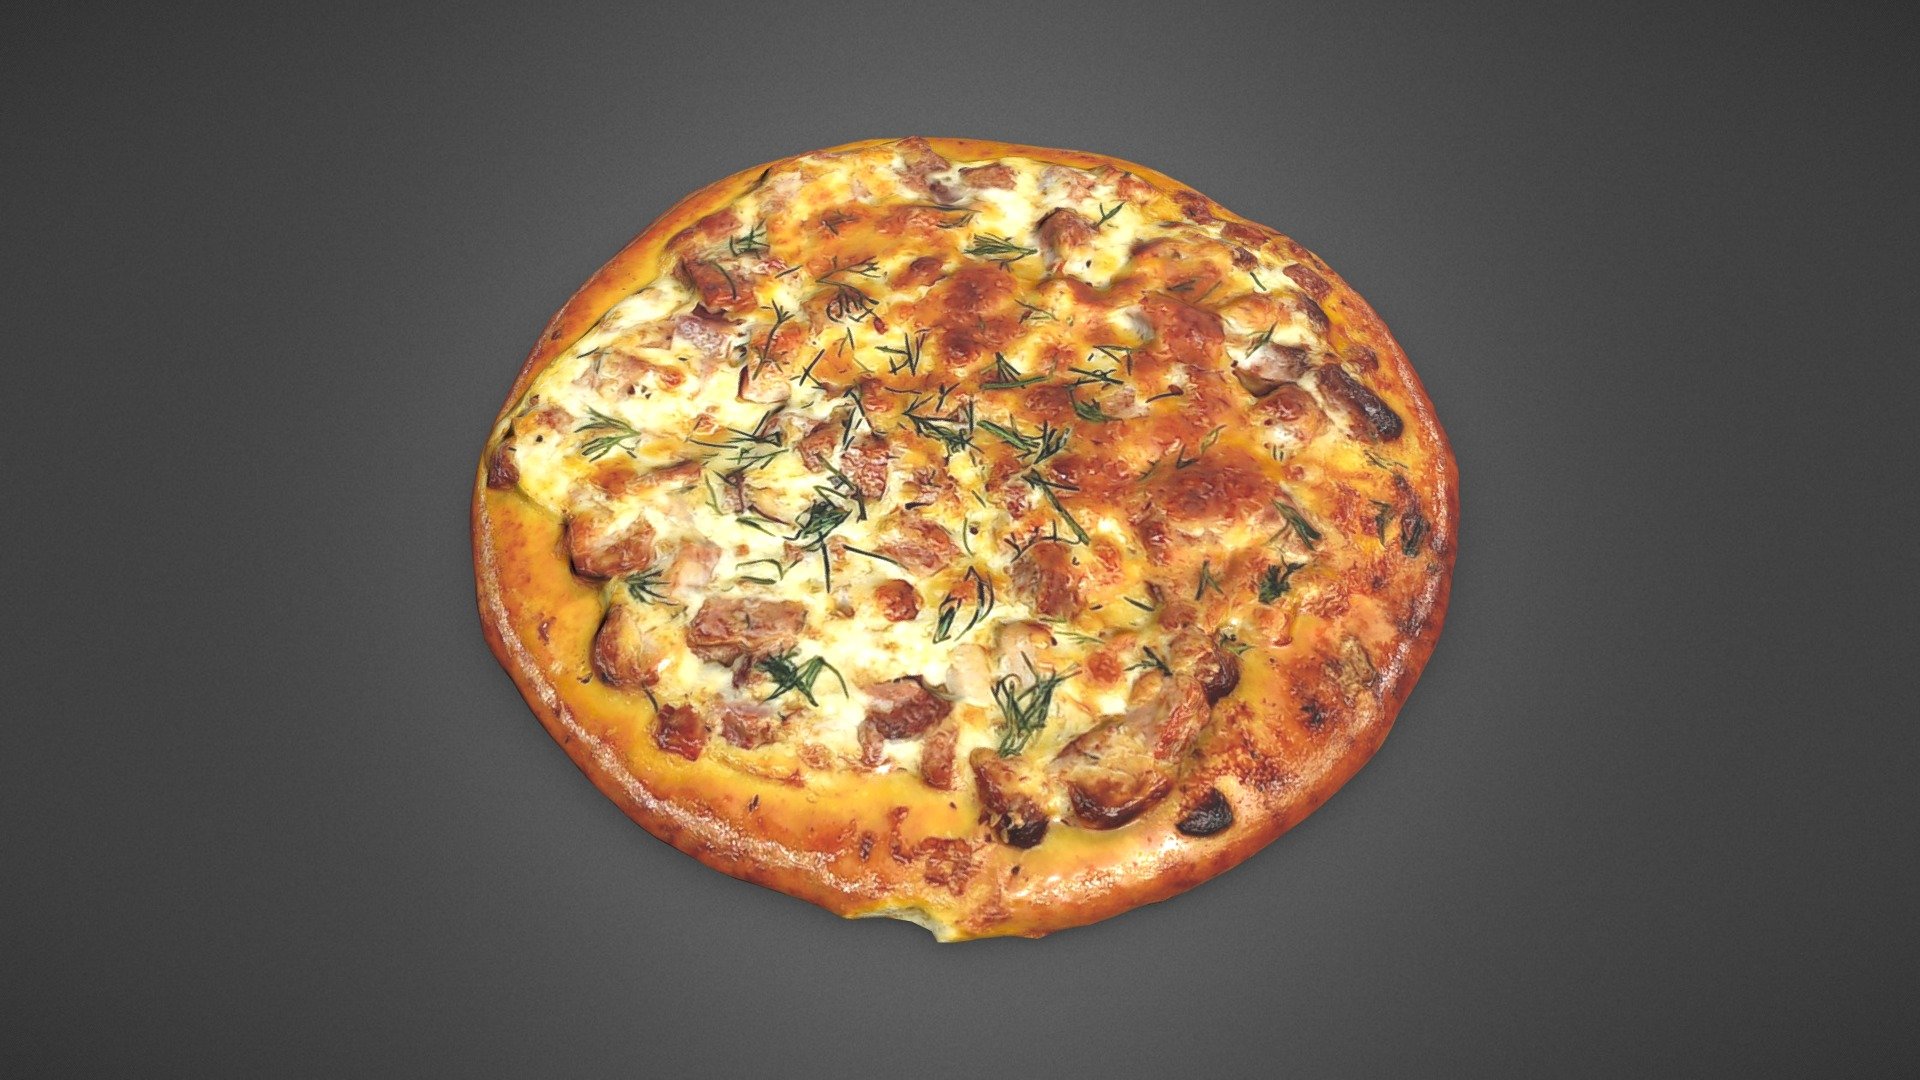 3d model is low poly and game-ready. The 3D model is made by photogrammetry using the C920 webcam (384 photographs 1920x1080), retopology manually was performed, also created UV Mapping, and the baking of textures. The real pizza with which the scan is made, probably the cheapest in the Russian market, is sold in supermarkets.

Real scale, Units: cm ~ 19.5 x 19.9 x 1.8 cm.

Formats:




.blend (Mesh + material (Principled BSDF) + Textures PBR - Roughness/Metallic) - Blender (ver. 2.93.4).

.tbscene (Mesh + Textures PBR) - Marmoset Toolbag 3 (Ver 3.08).

.FBX (only mesh without materials)

.obj (Triangulated, only mesh without materials)

.glb (Triangulated, Mesh + Textures PBR (compressed in format)) 

.gltf ( Triangulated, Mesh + Textures PBR - .jpg ) - exported from glTF Tools Visual Studio Code.

.unitypackage (Triangulated, Mesh + Textures - .tga)

.FBX for Unity (only mesh without materials, up = Y Up). 

.spp (Substance Painter Project ver. 2021).
 - Cheap Pizza - 3D model by Grishmanovskij Anton (@GrishmanovskijAnton) 3d model